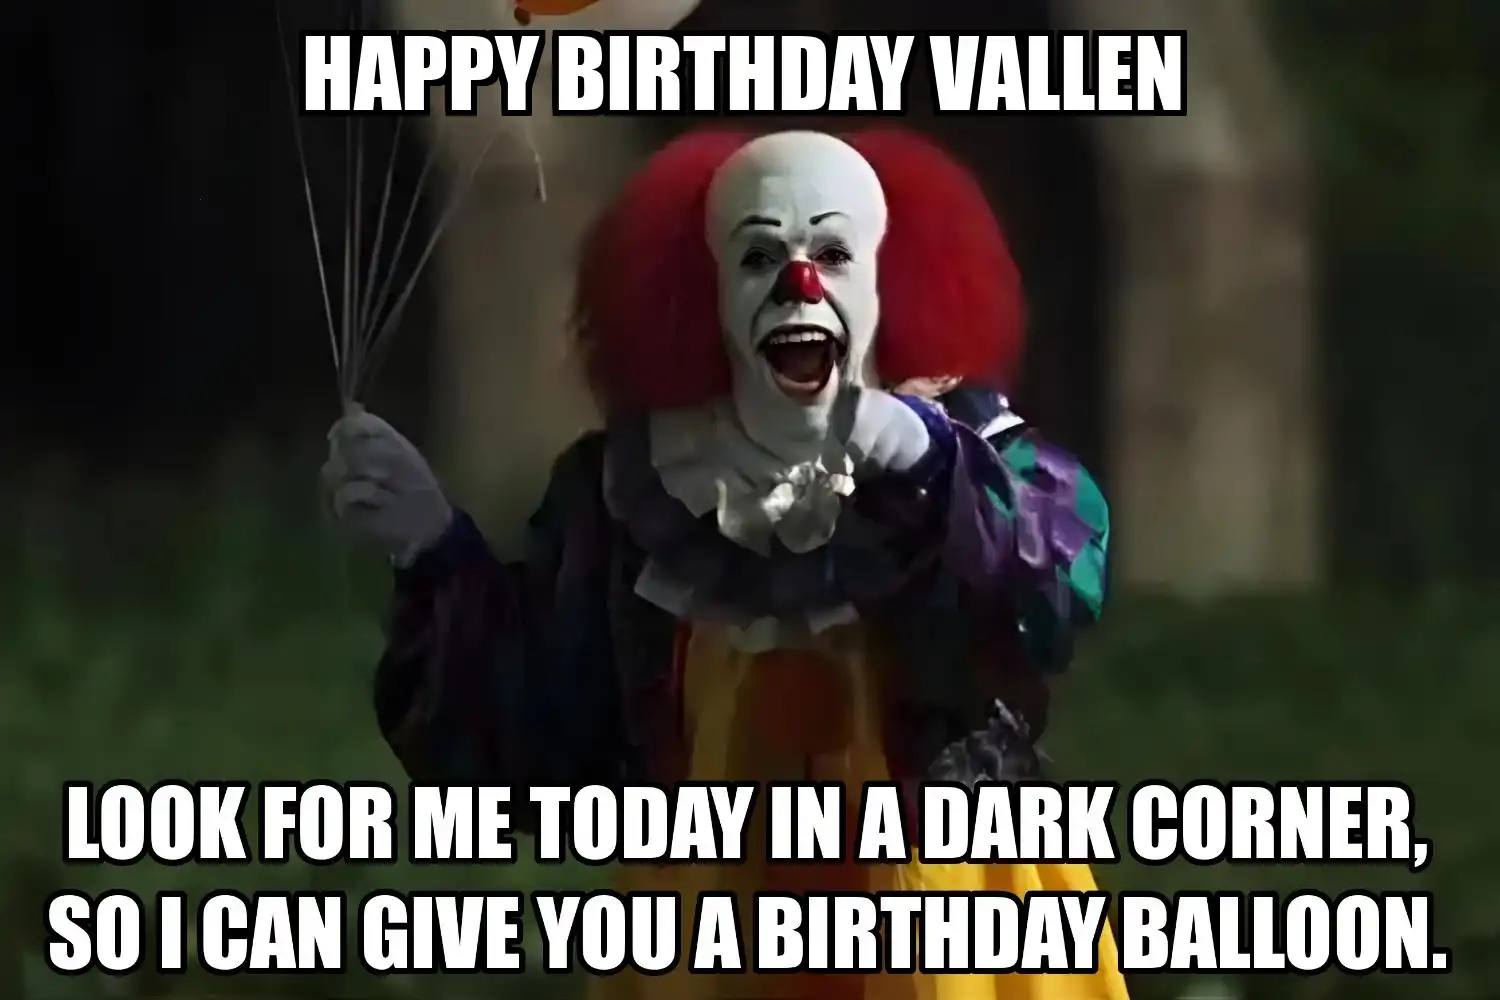 Happy Birthday Vallen I Can Give You A Balloon Meme